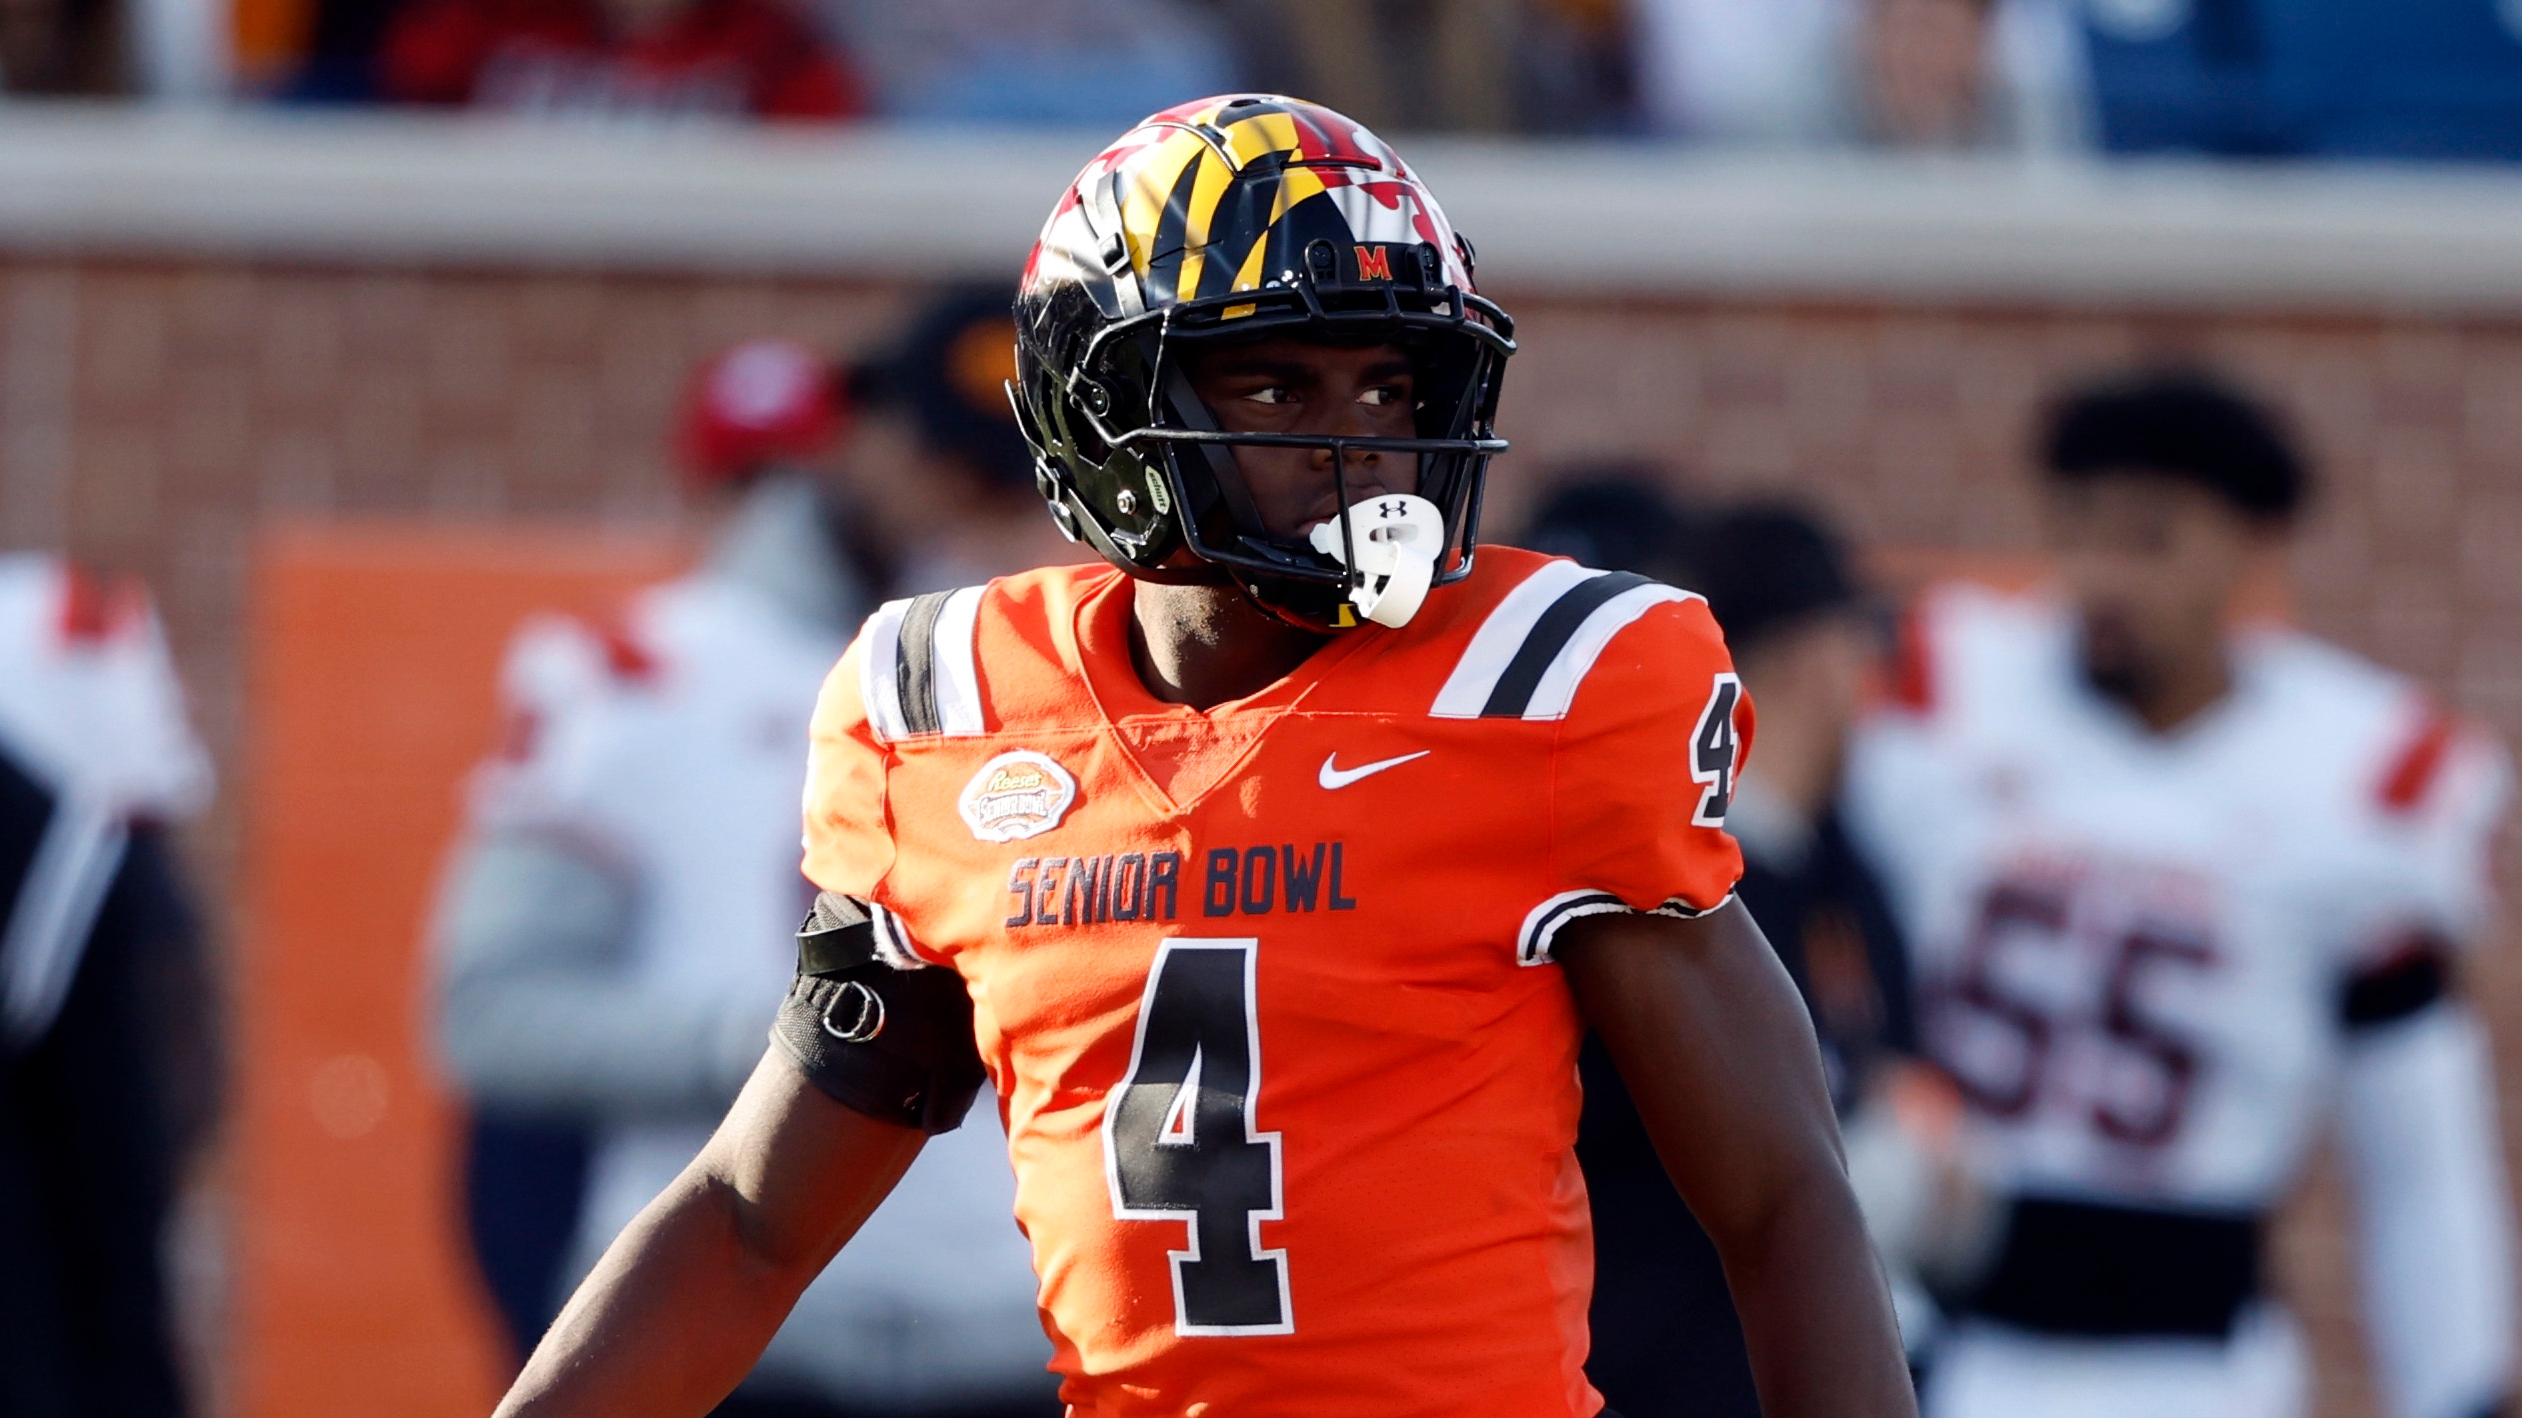 LIST, 2023 NFL Draft prospects from DC, Maryland and Virginia